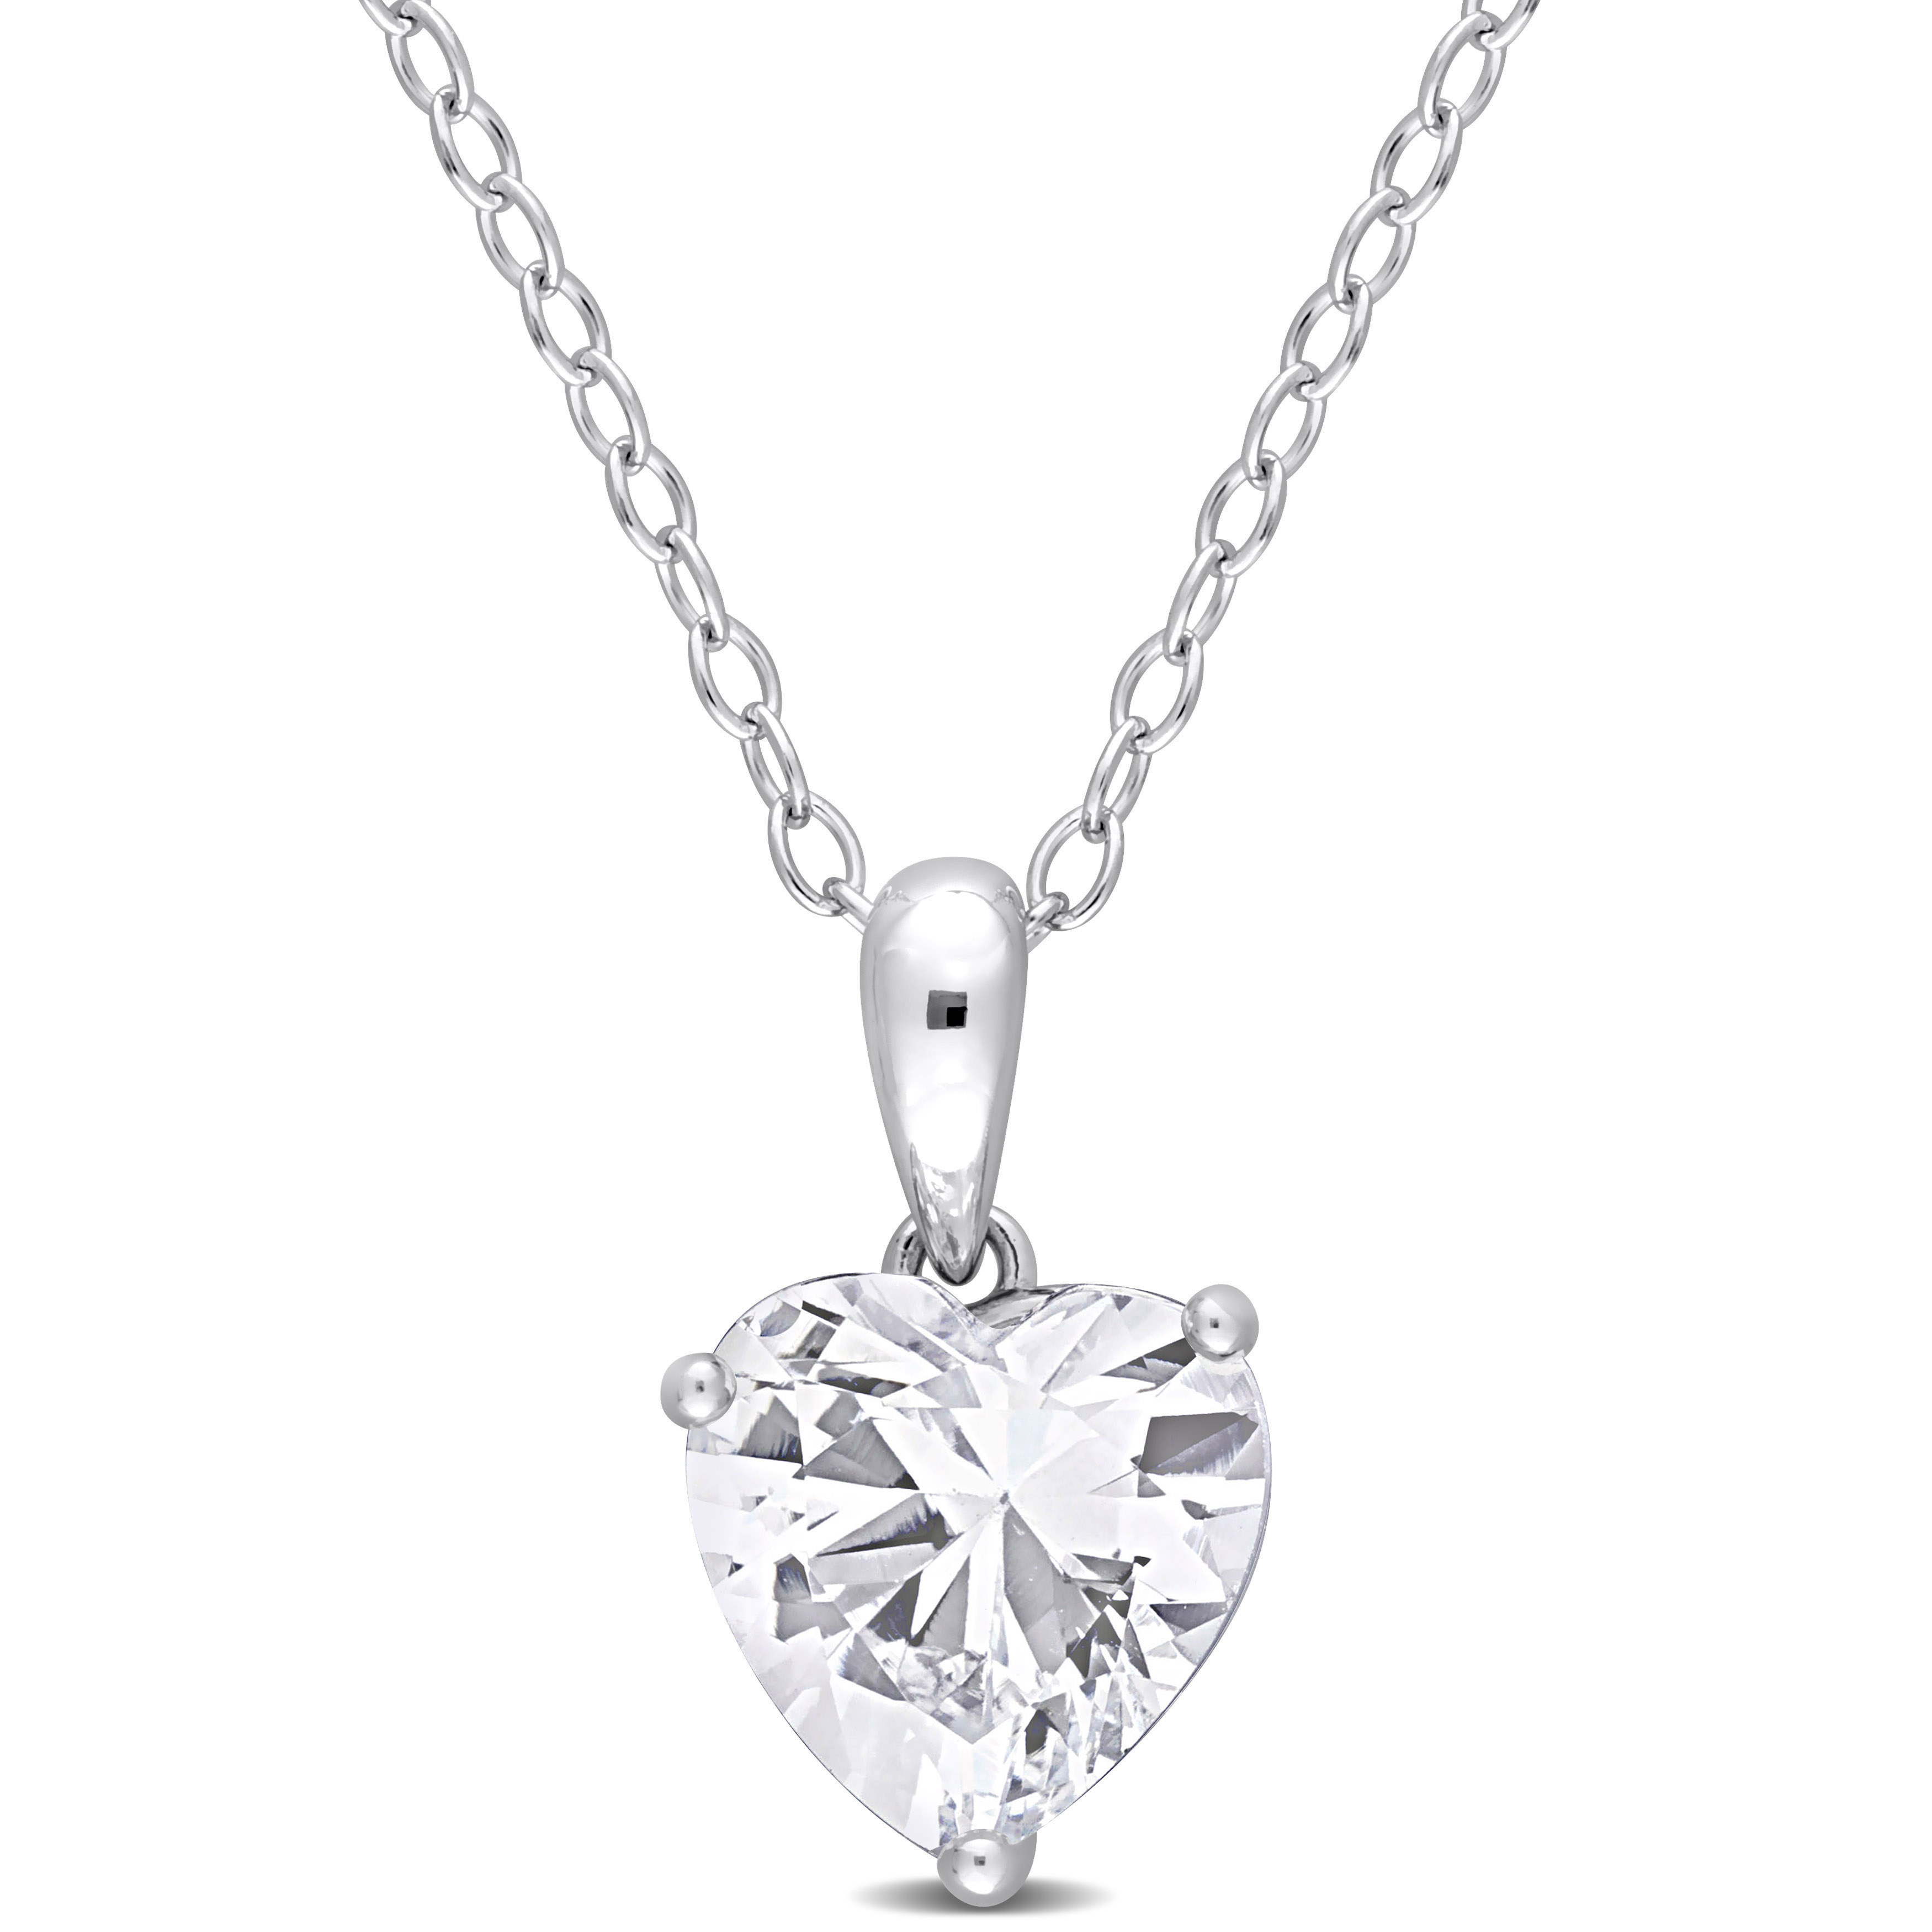 2 1/4 CT TGW Heart Shape Created White Sapphire Solitaire Heart Design Pendant with Chain in Sterling Silver - 18 in.